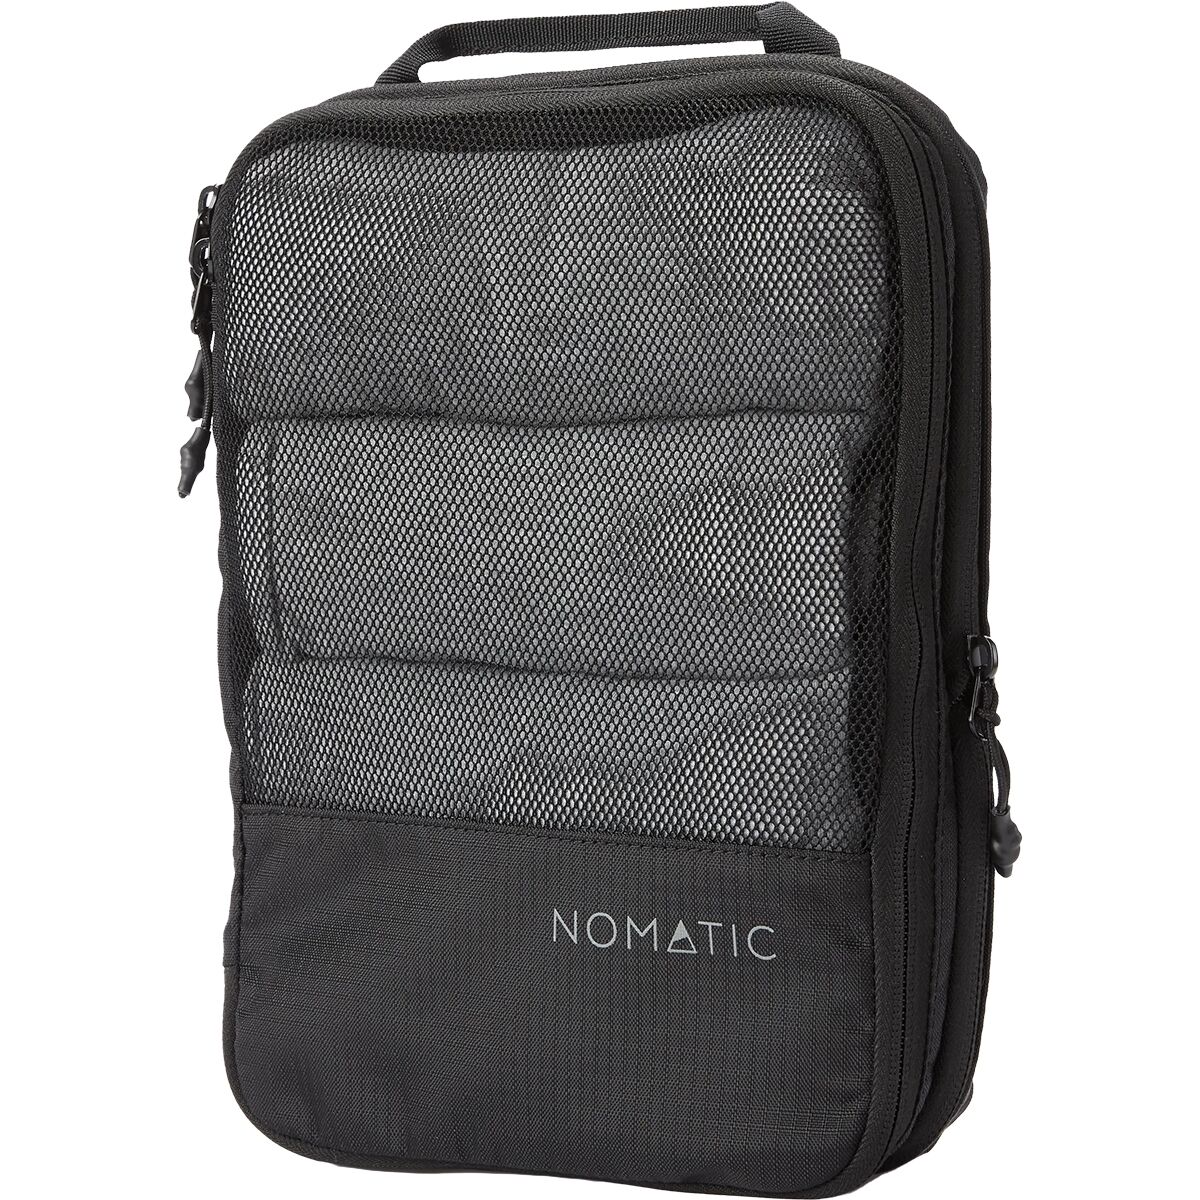 Photos - Other photo accessories Nomatic Packing Cube 